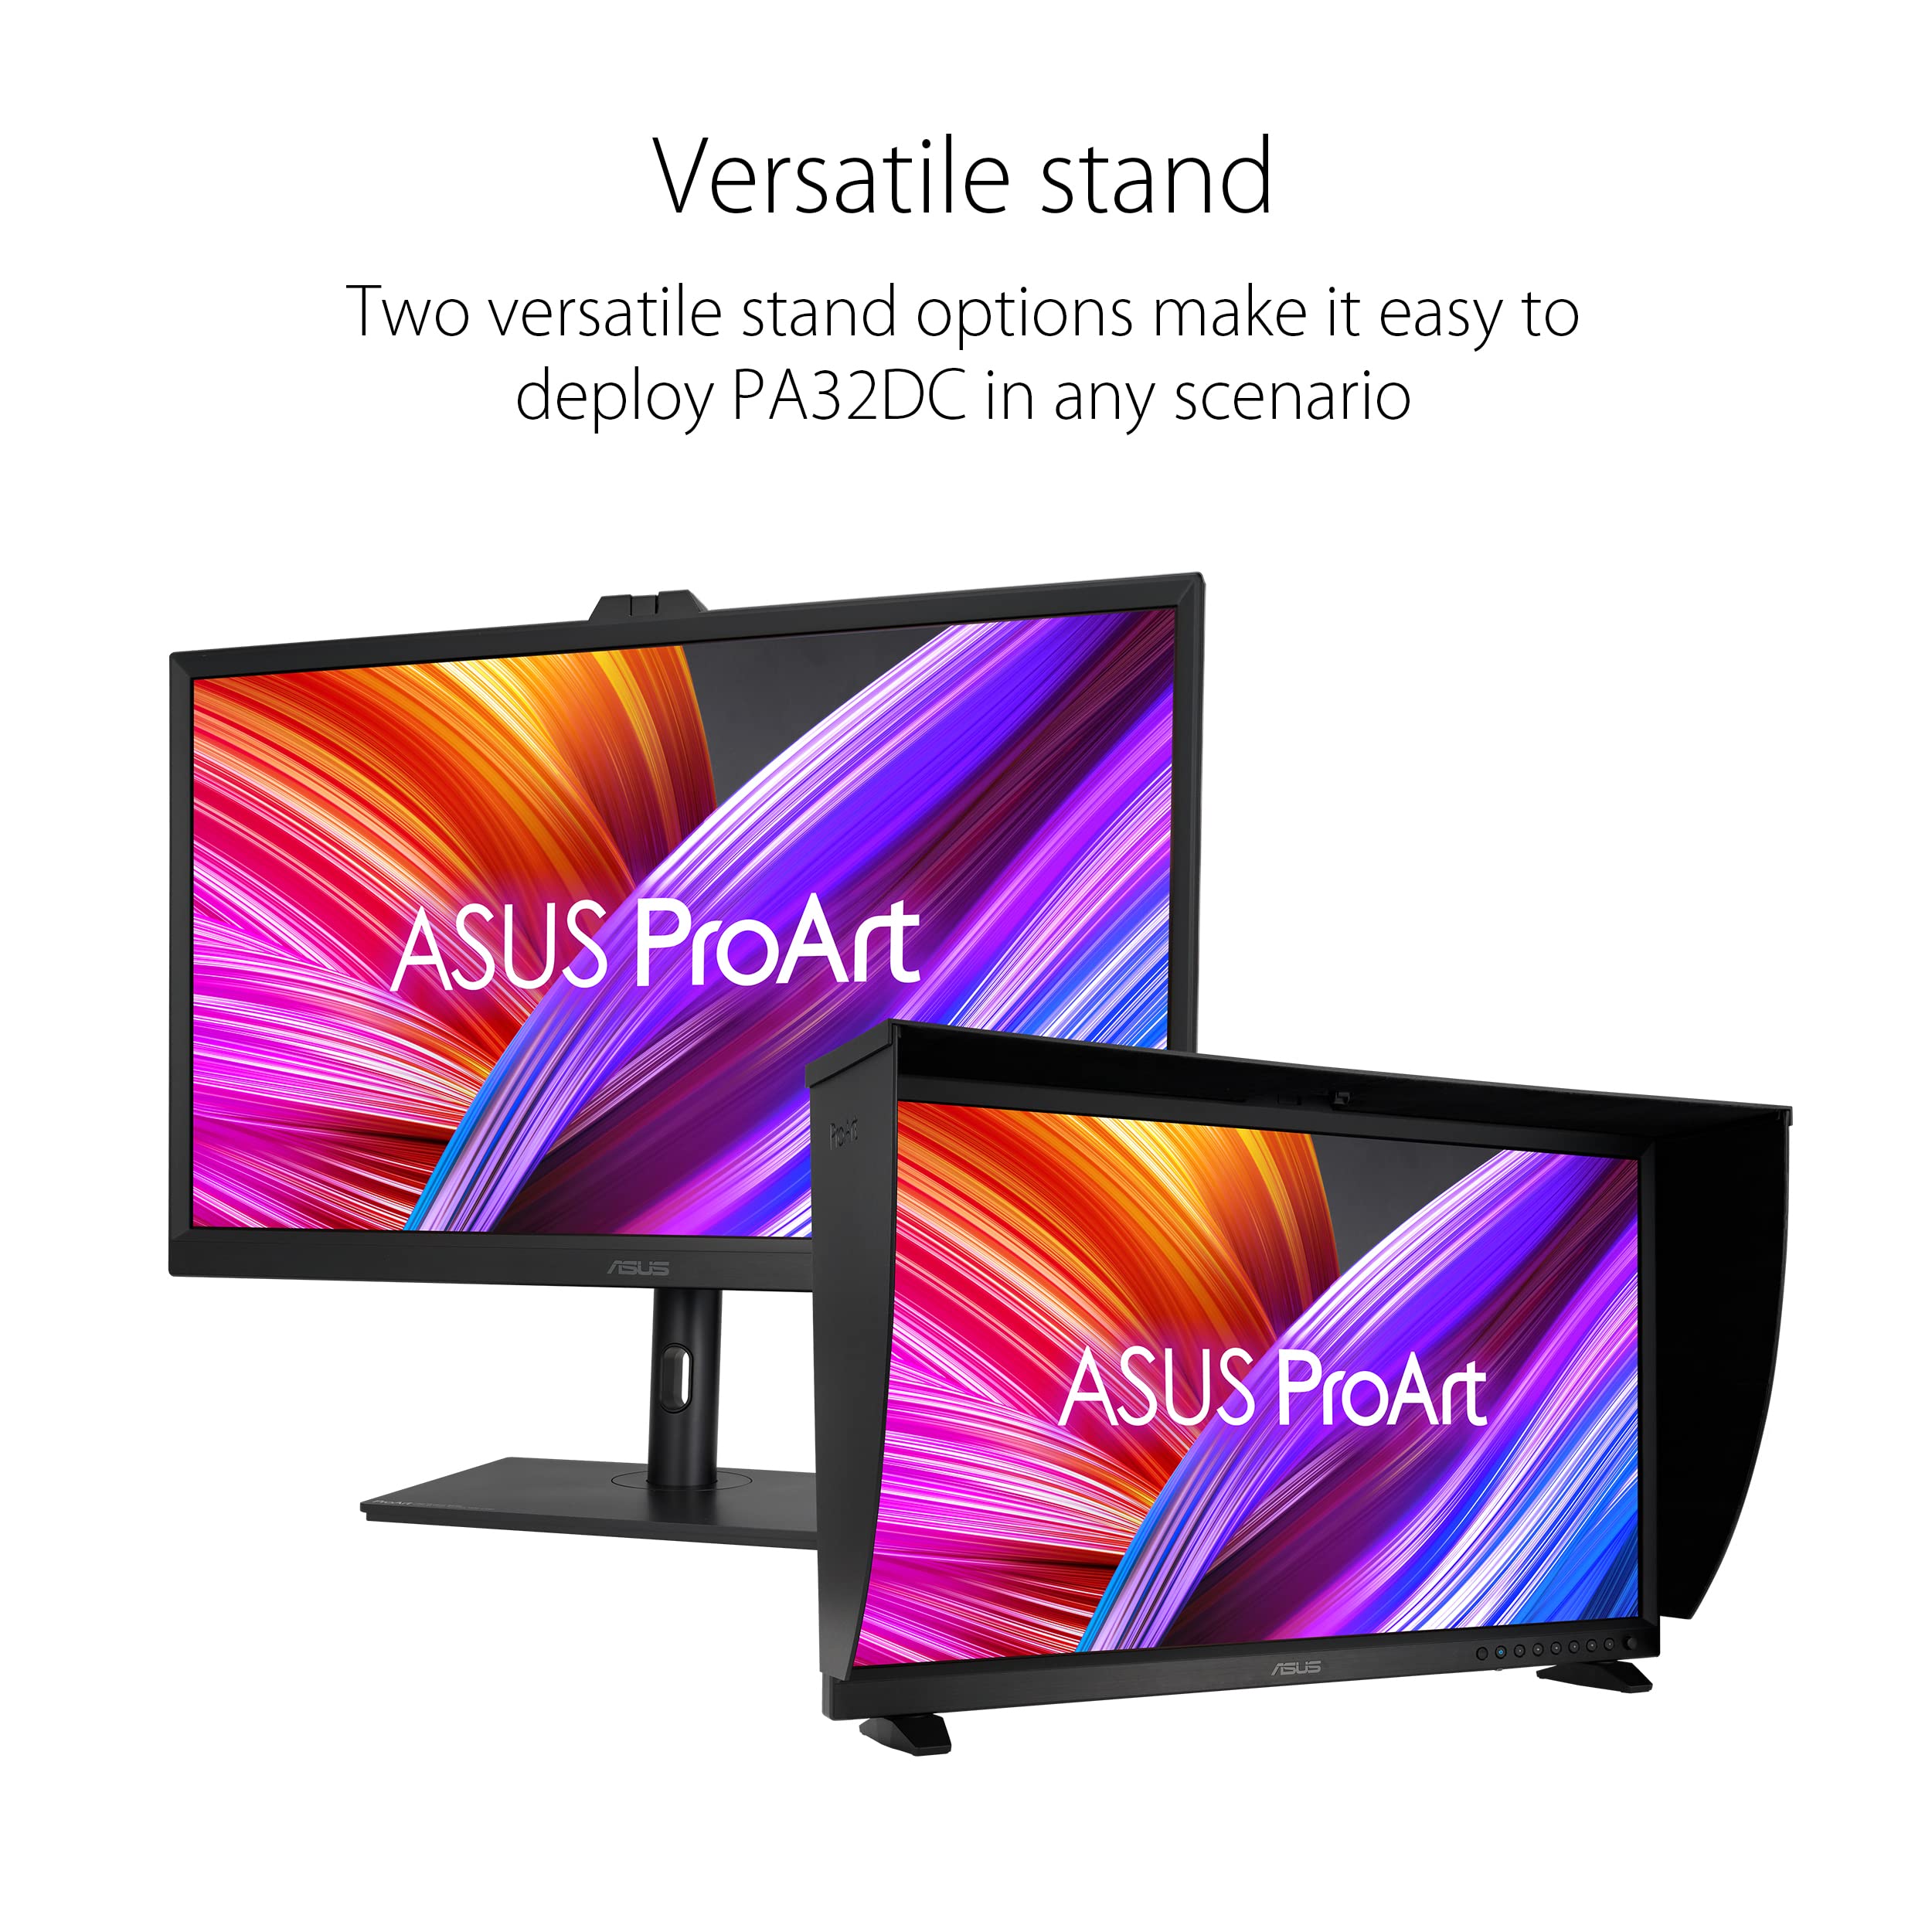 ASUS ProArt Display 31.5” 4K OLED Professional Monitor (PA32DC) - Built-in Motorized Colorimeter, Color Accuracy ΔE1, 99% DCI-P3, USB-C, Auto Calibration, Compatible with Laptop & Mac Monitor,BLACK